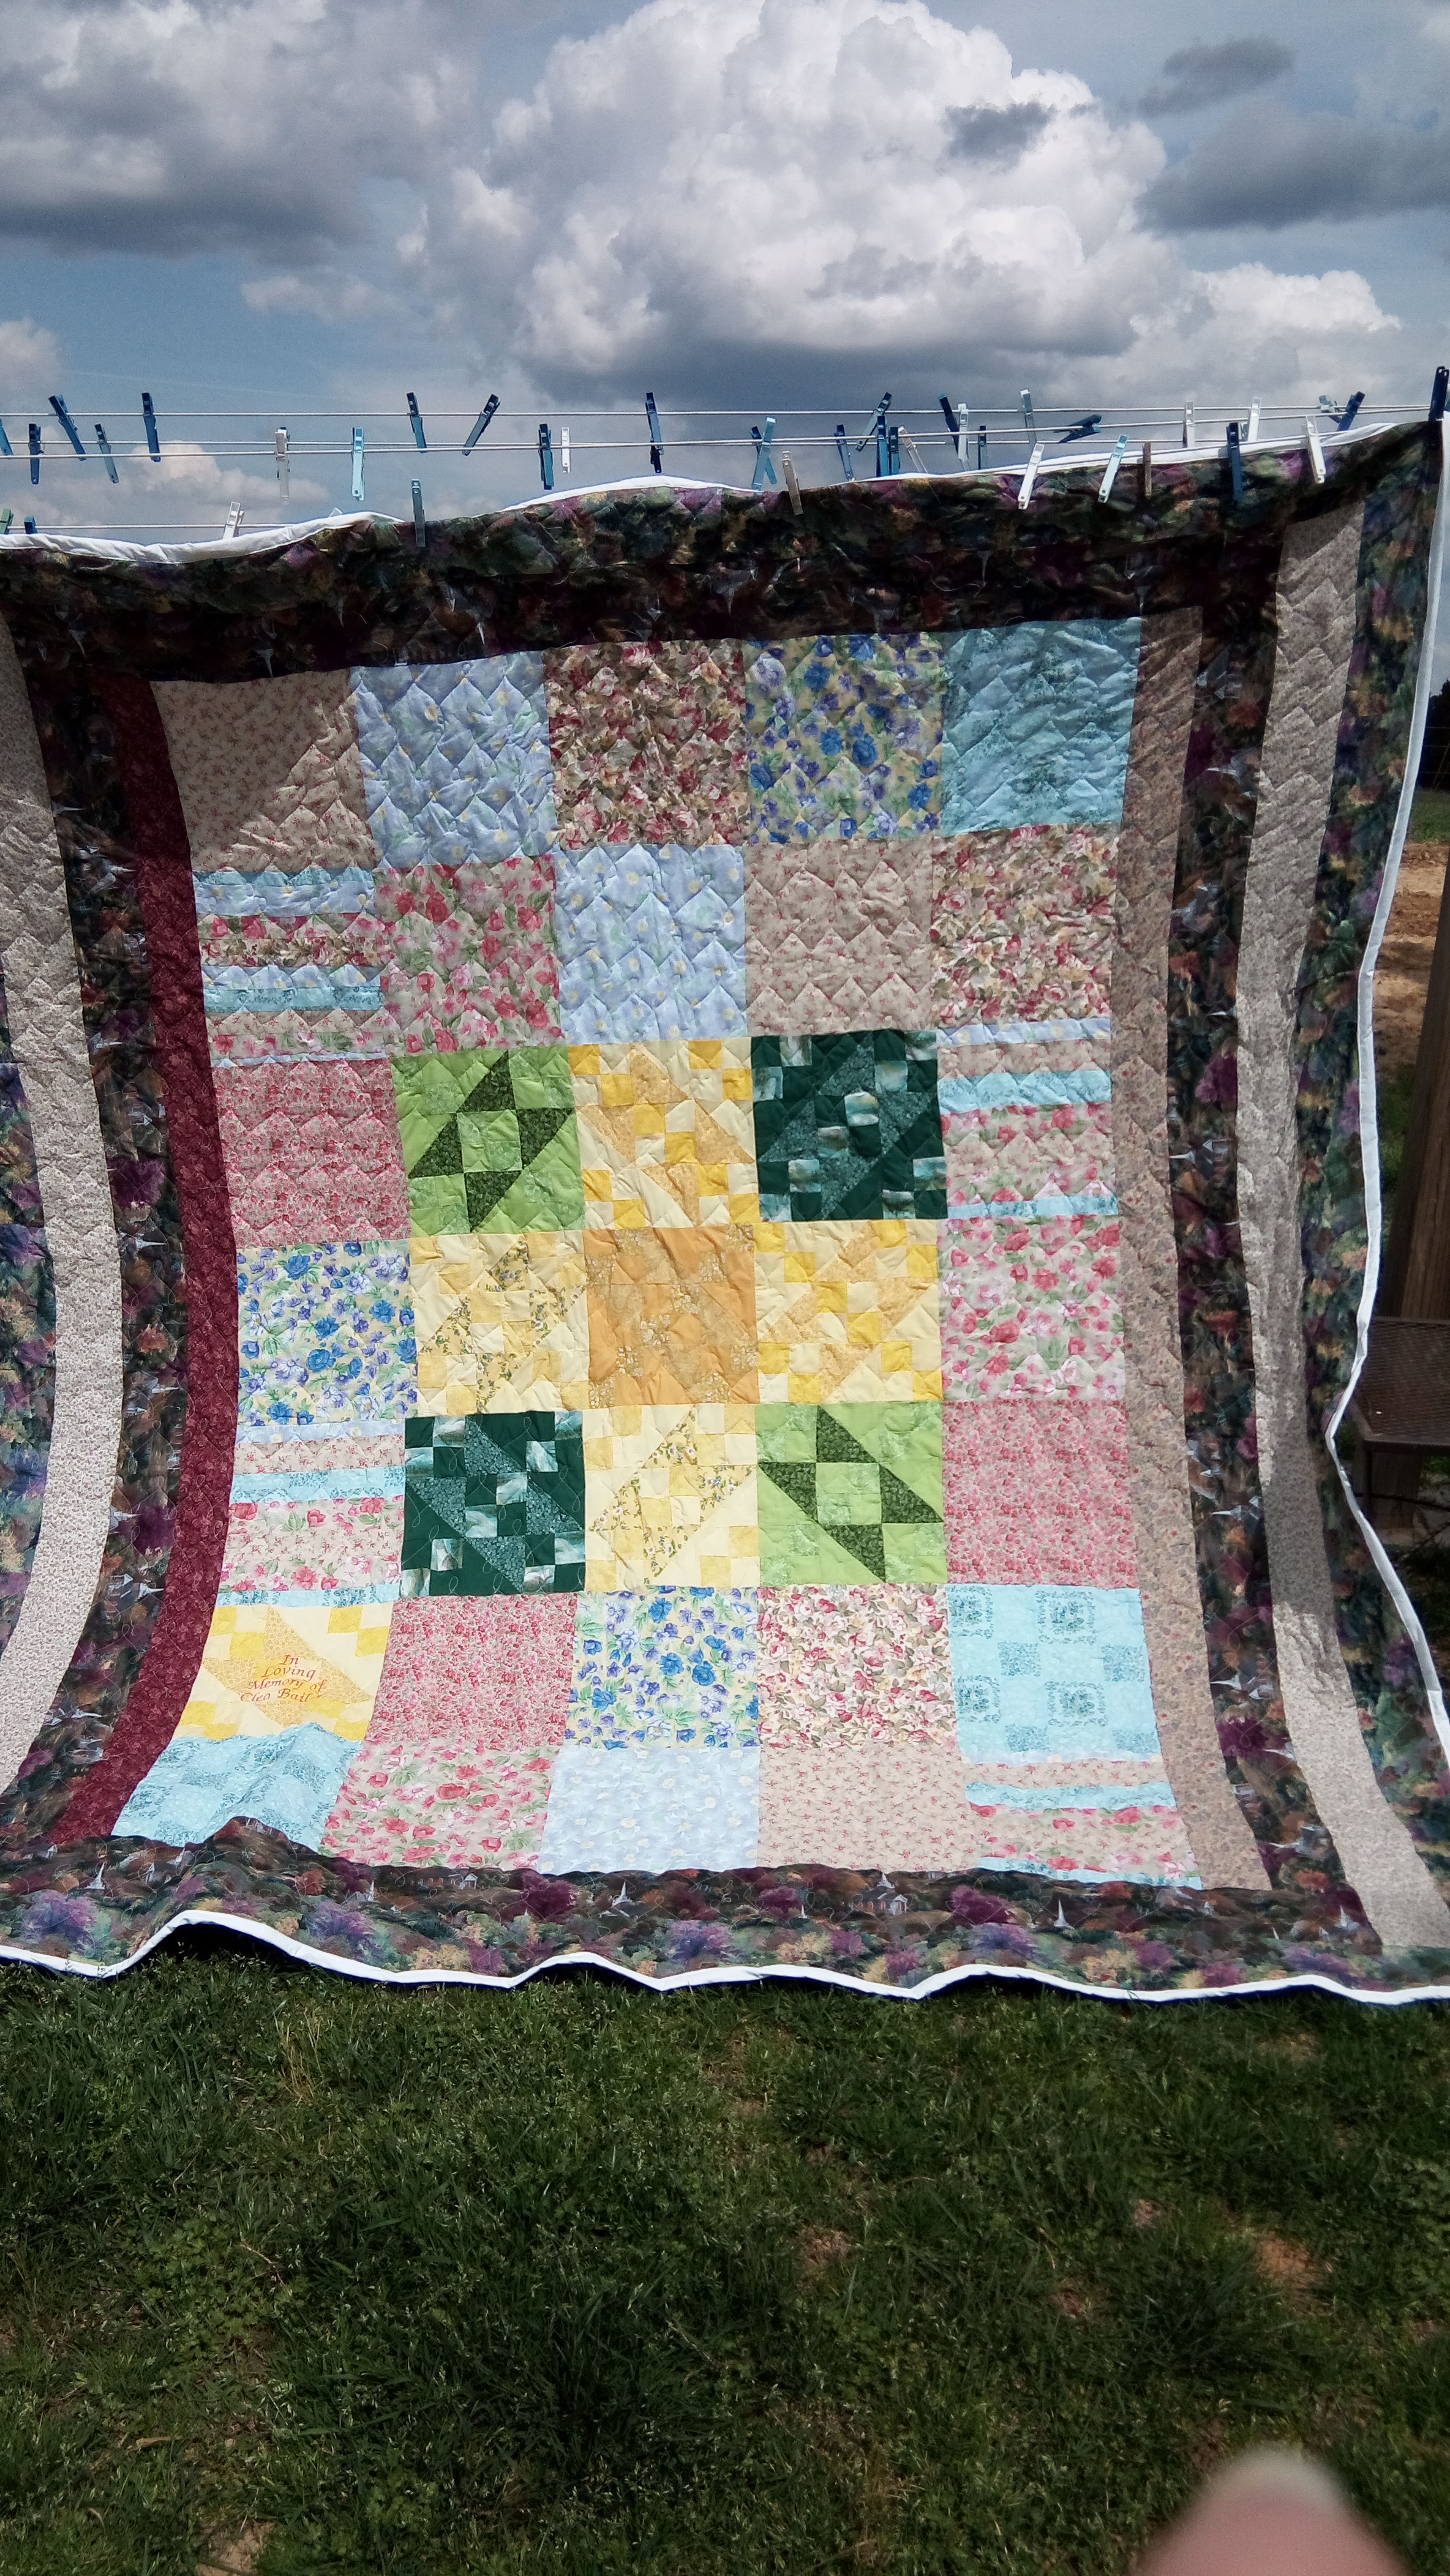 My grandmother did the center squares and I made this for my mom